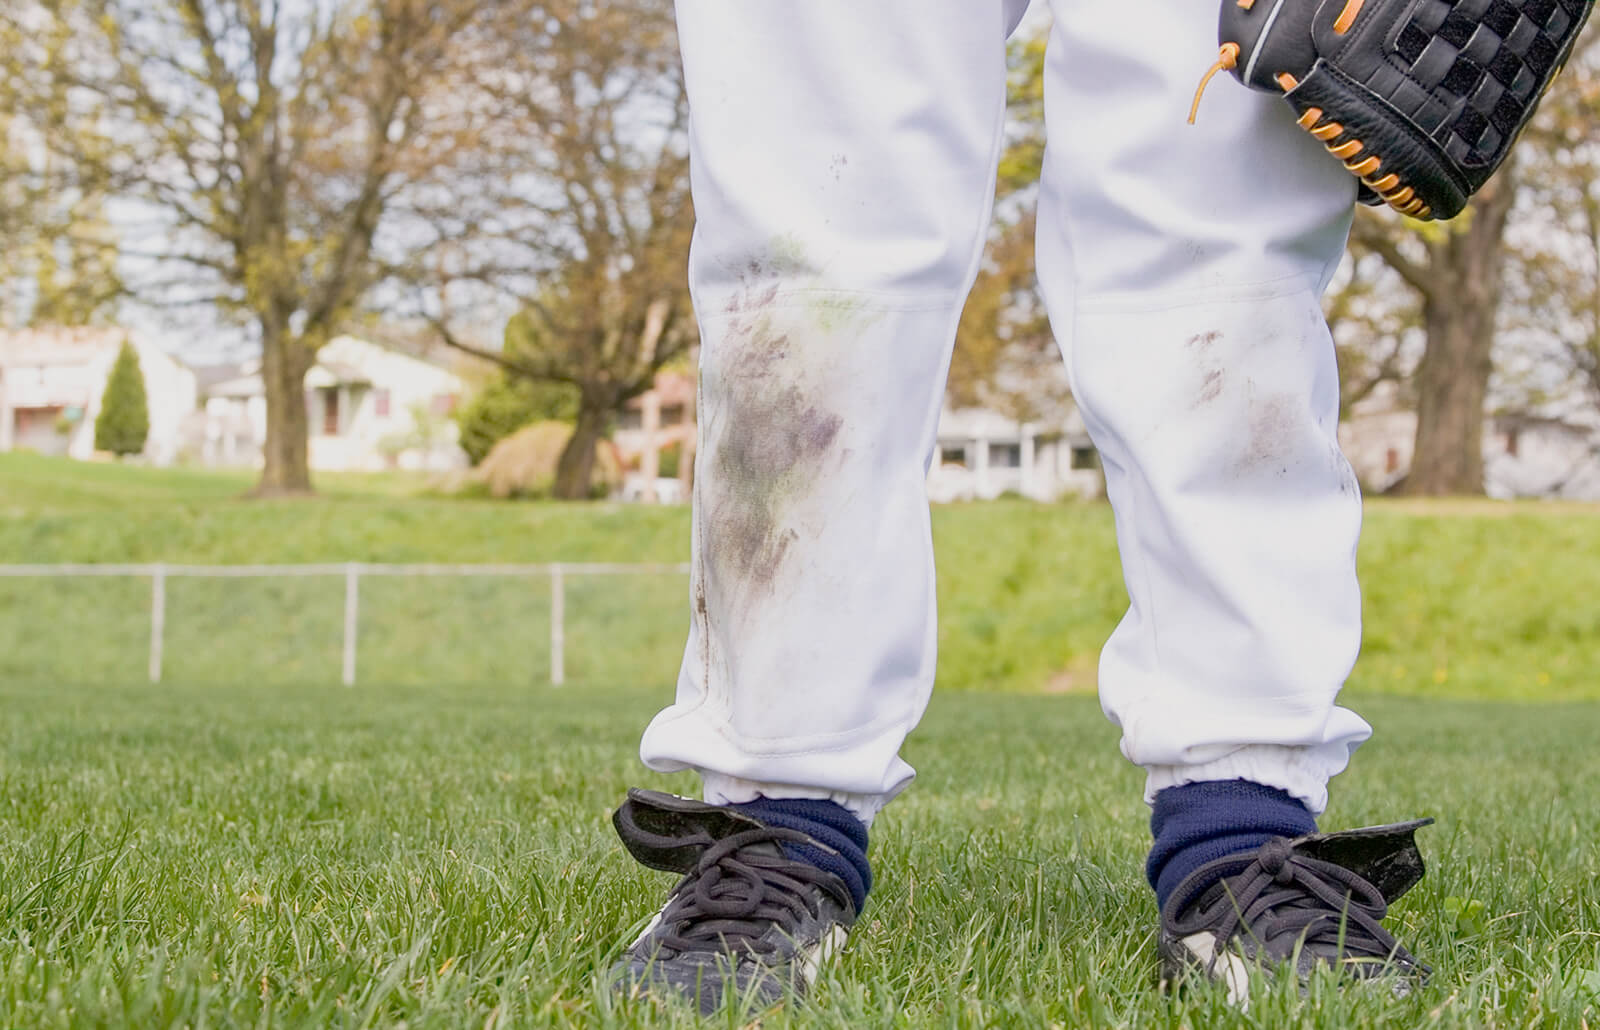 How To Get Grass Stains Out Of White Football Pants